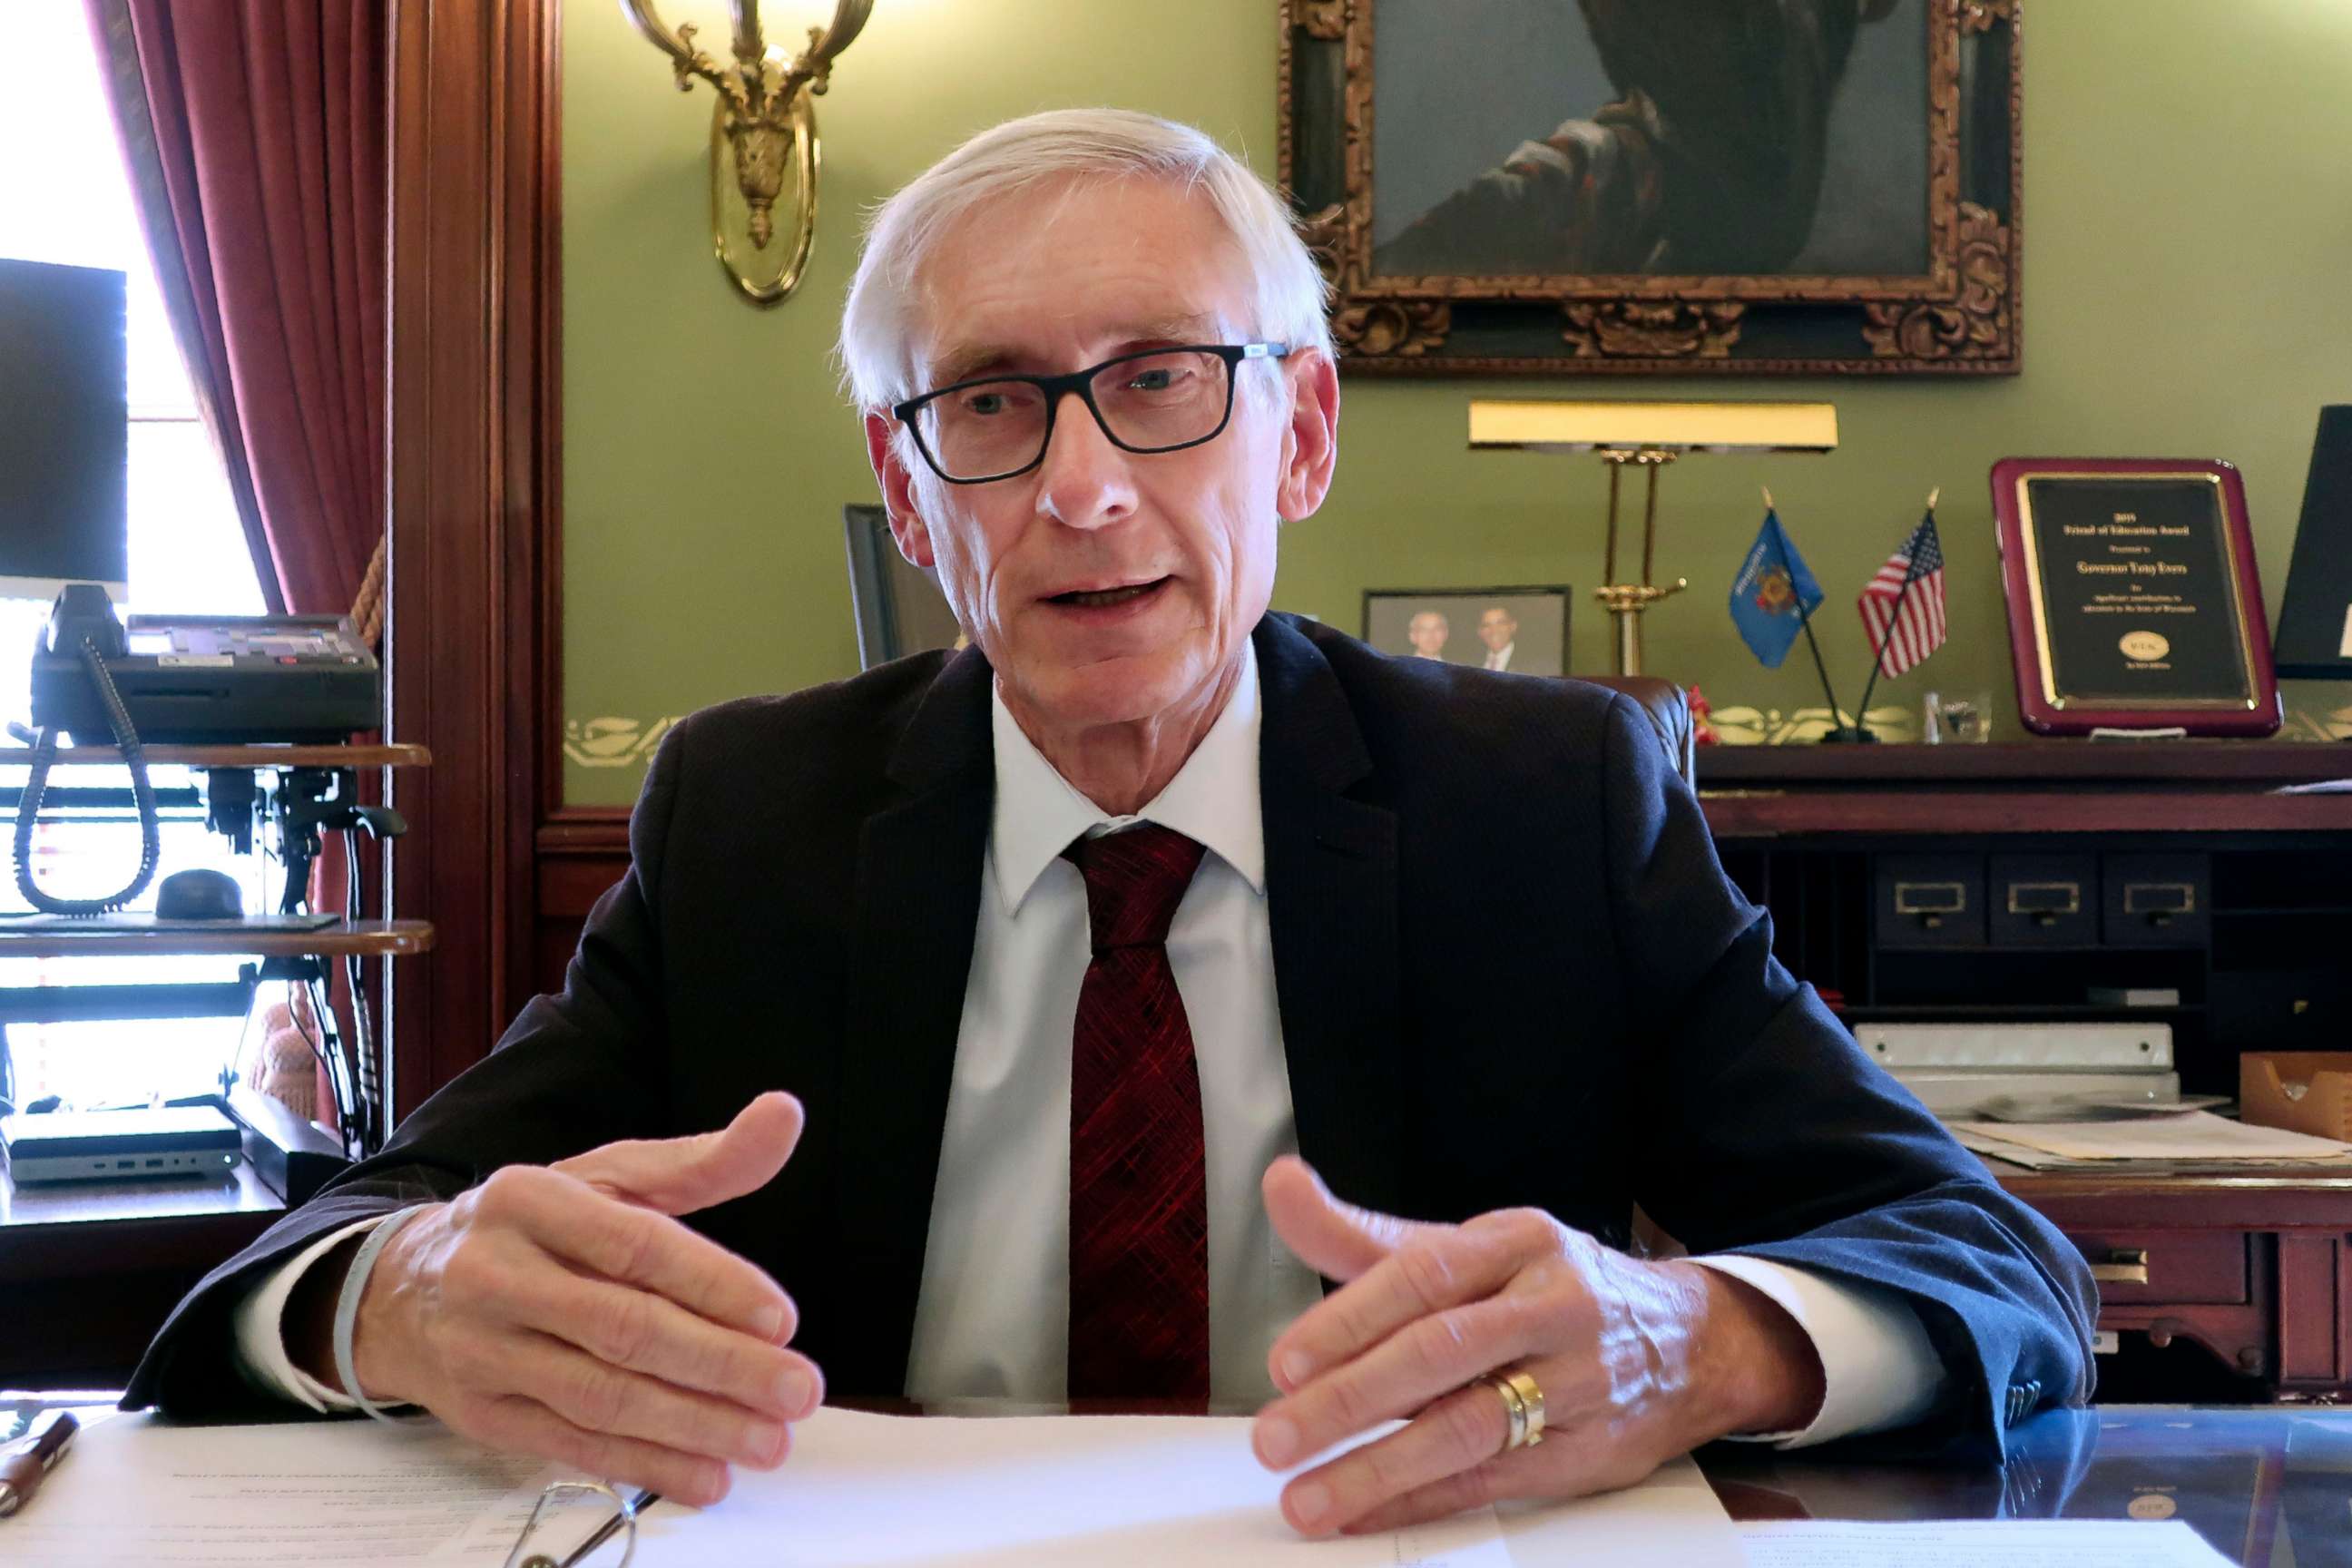 PHOTO: Wisconsin Gov. Tony Evers speaks during an interview in Madison, Wis., Dec. 4, 2019.